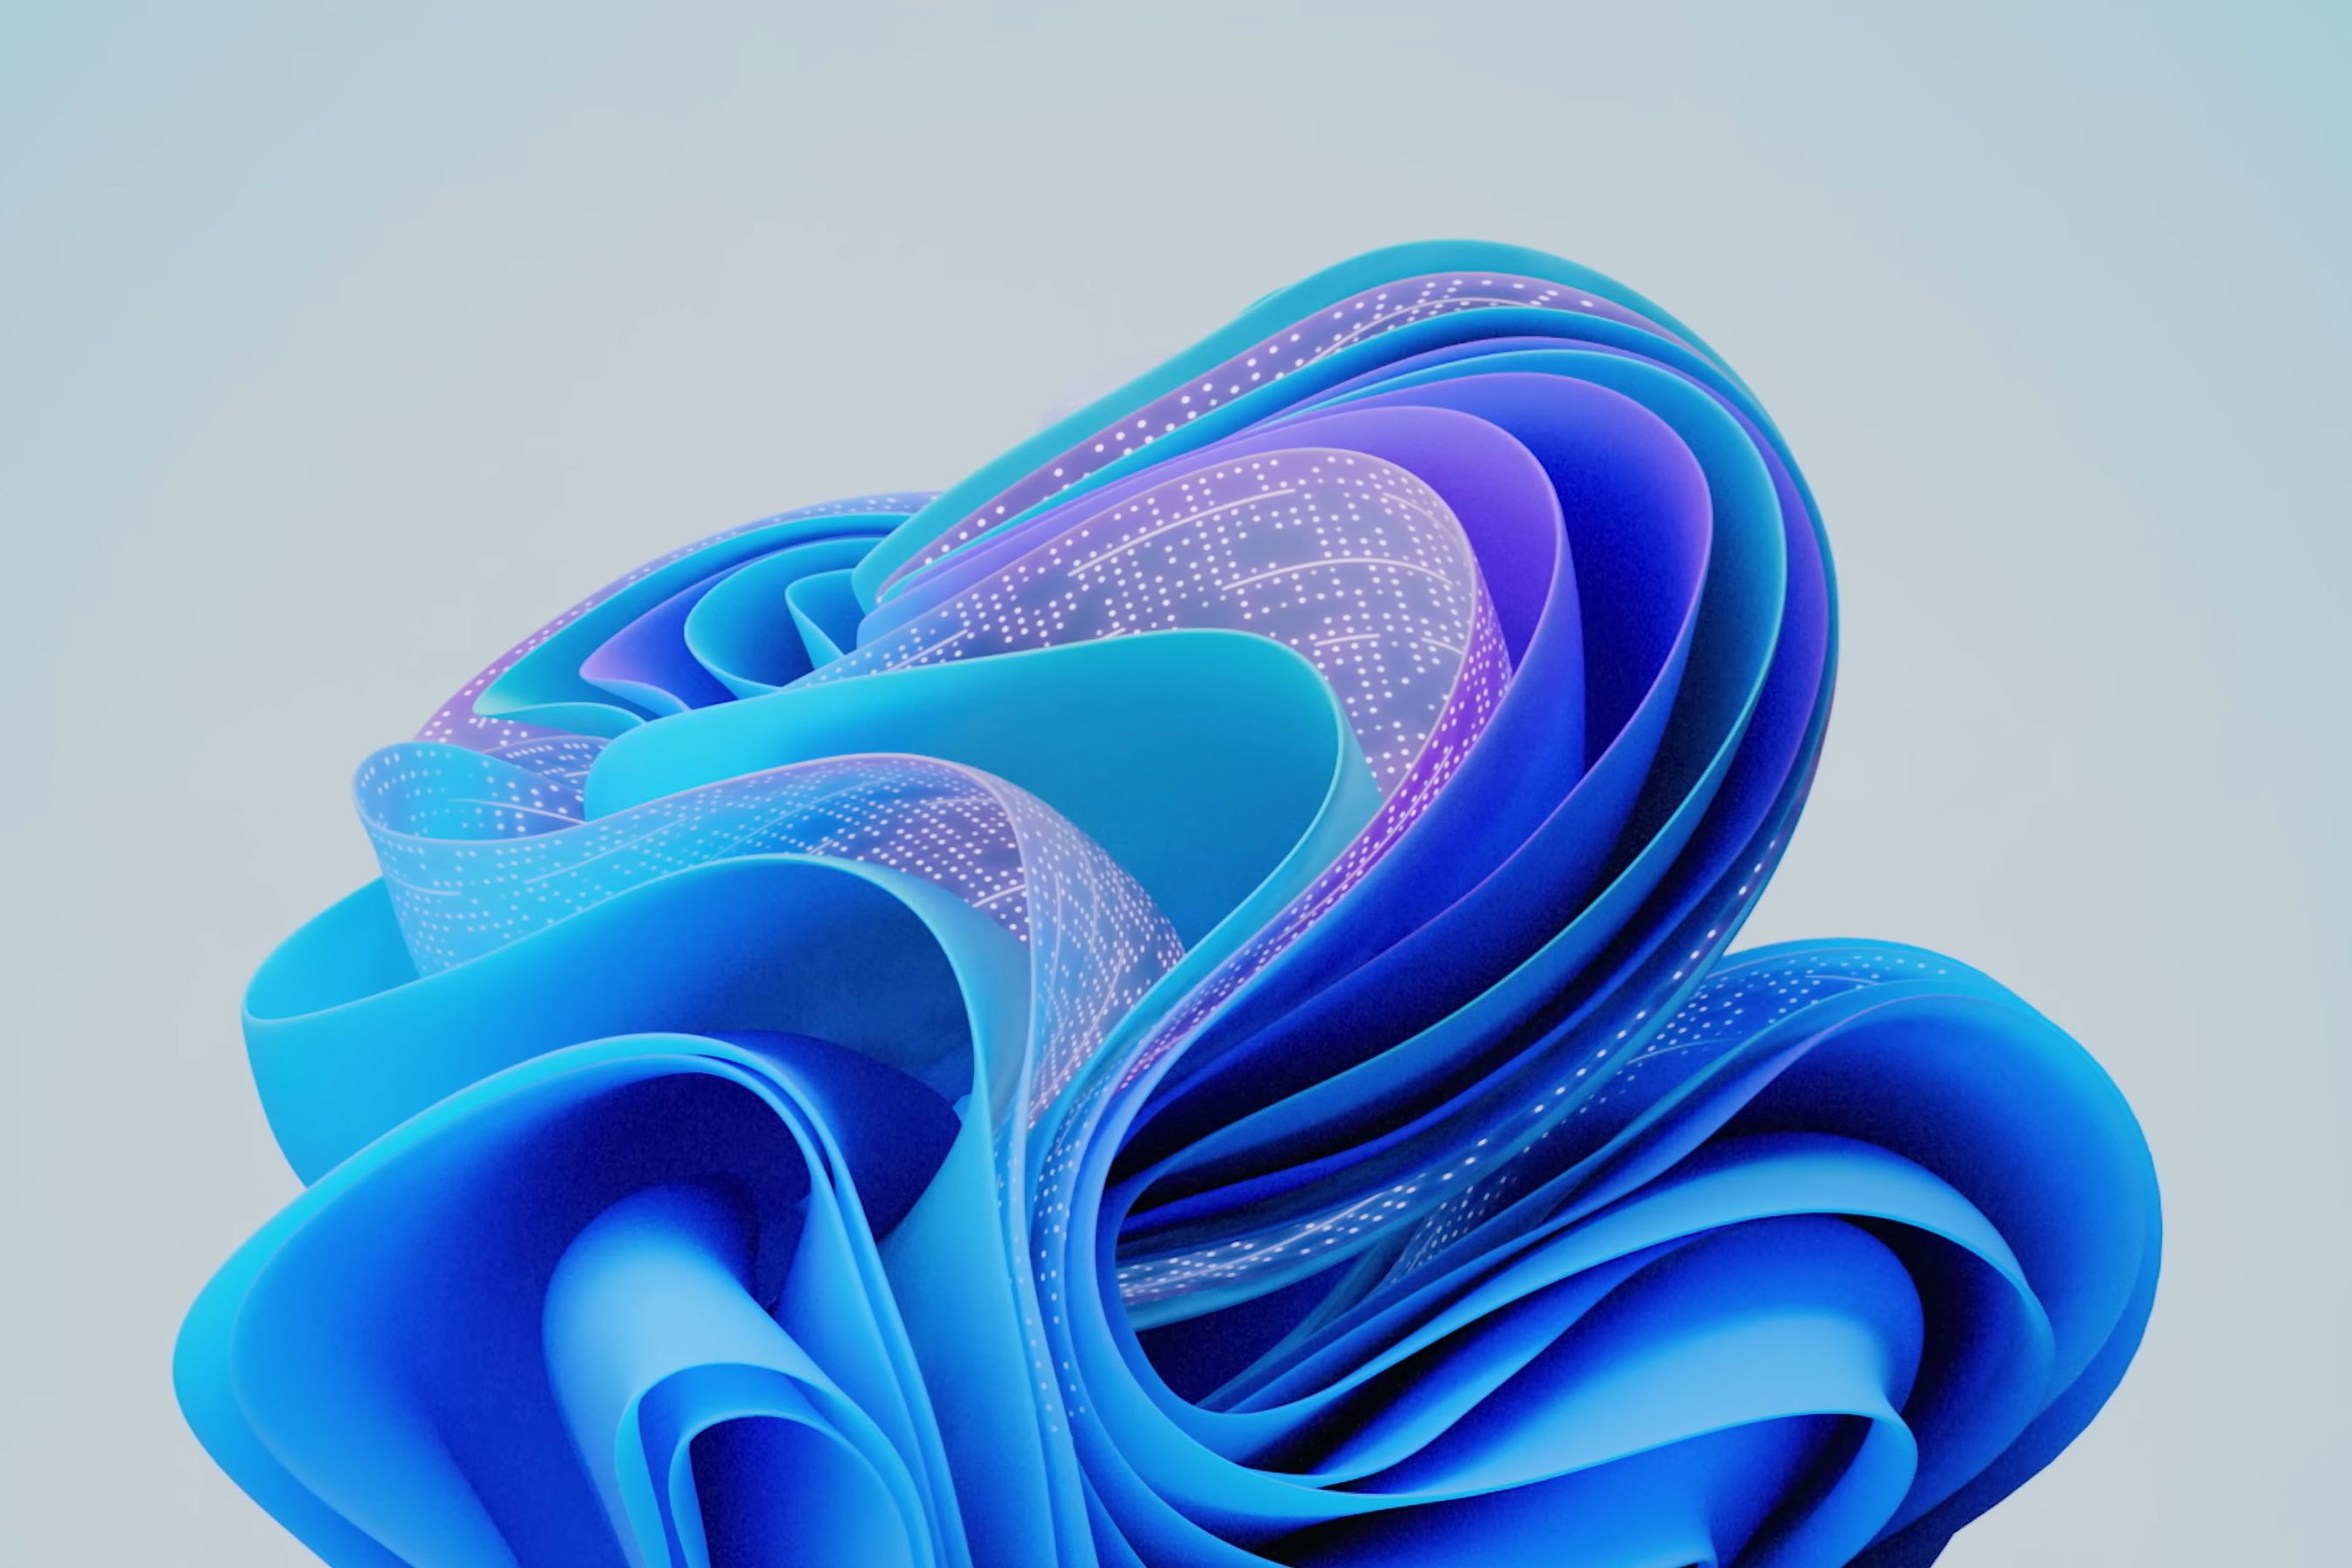 The default Windows 11 Bloom wallpaper with wavy blue shapes, but some are colored purple and show white dots to symbolize artificial intelligence